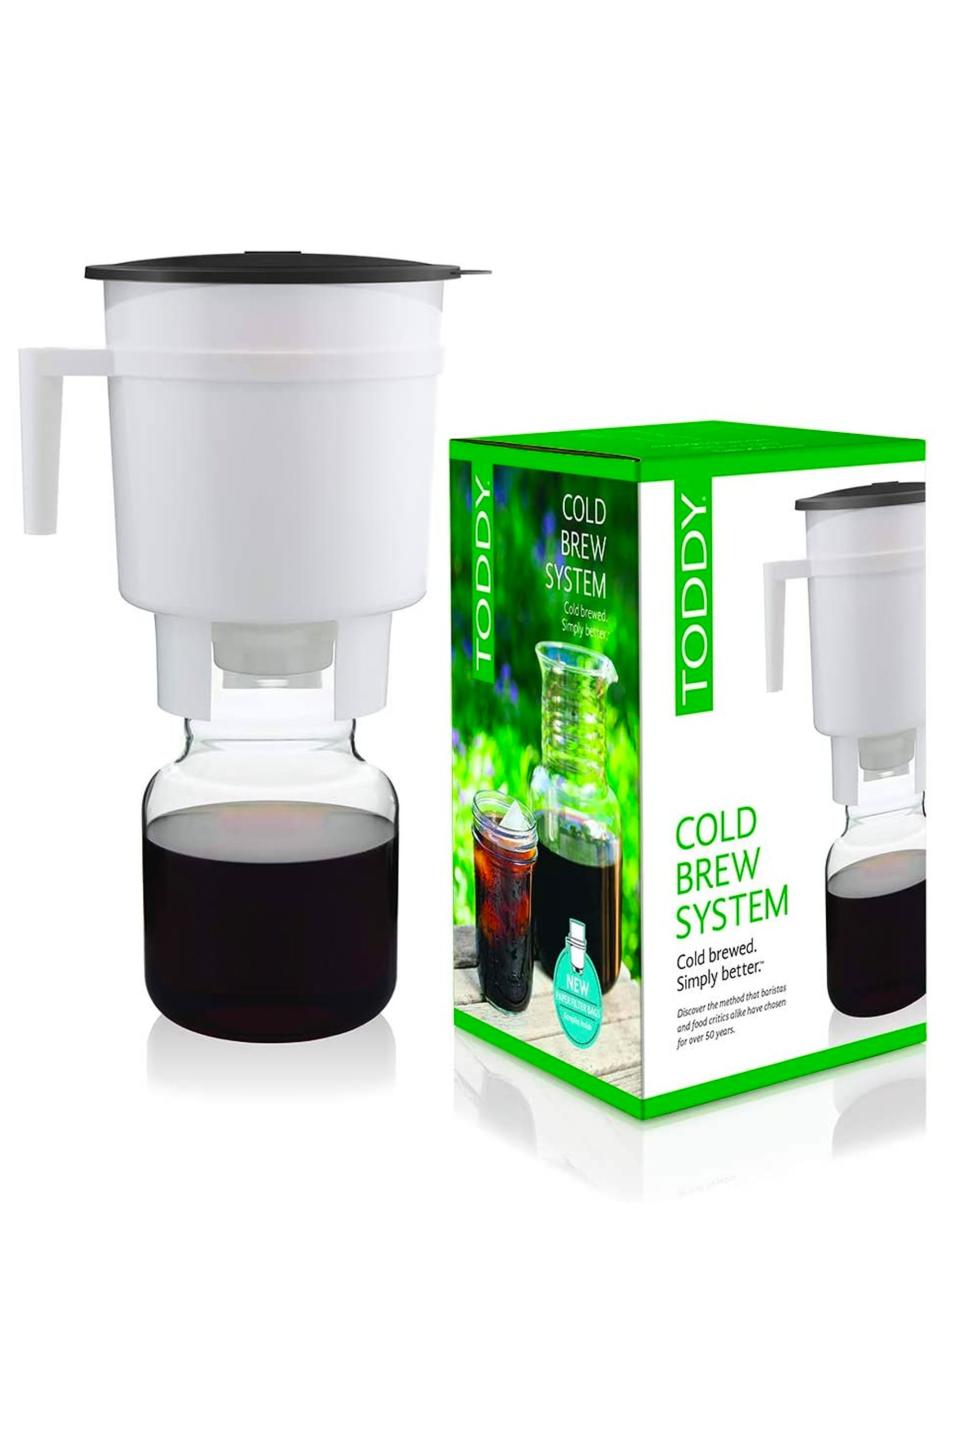 4) Toddy Cold Brew System